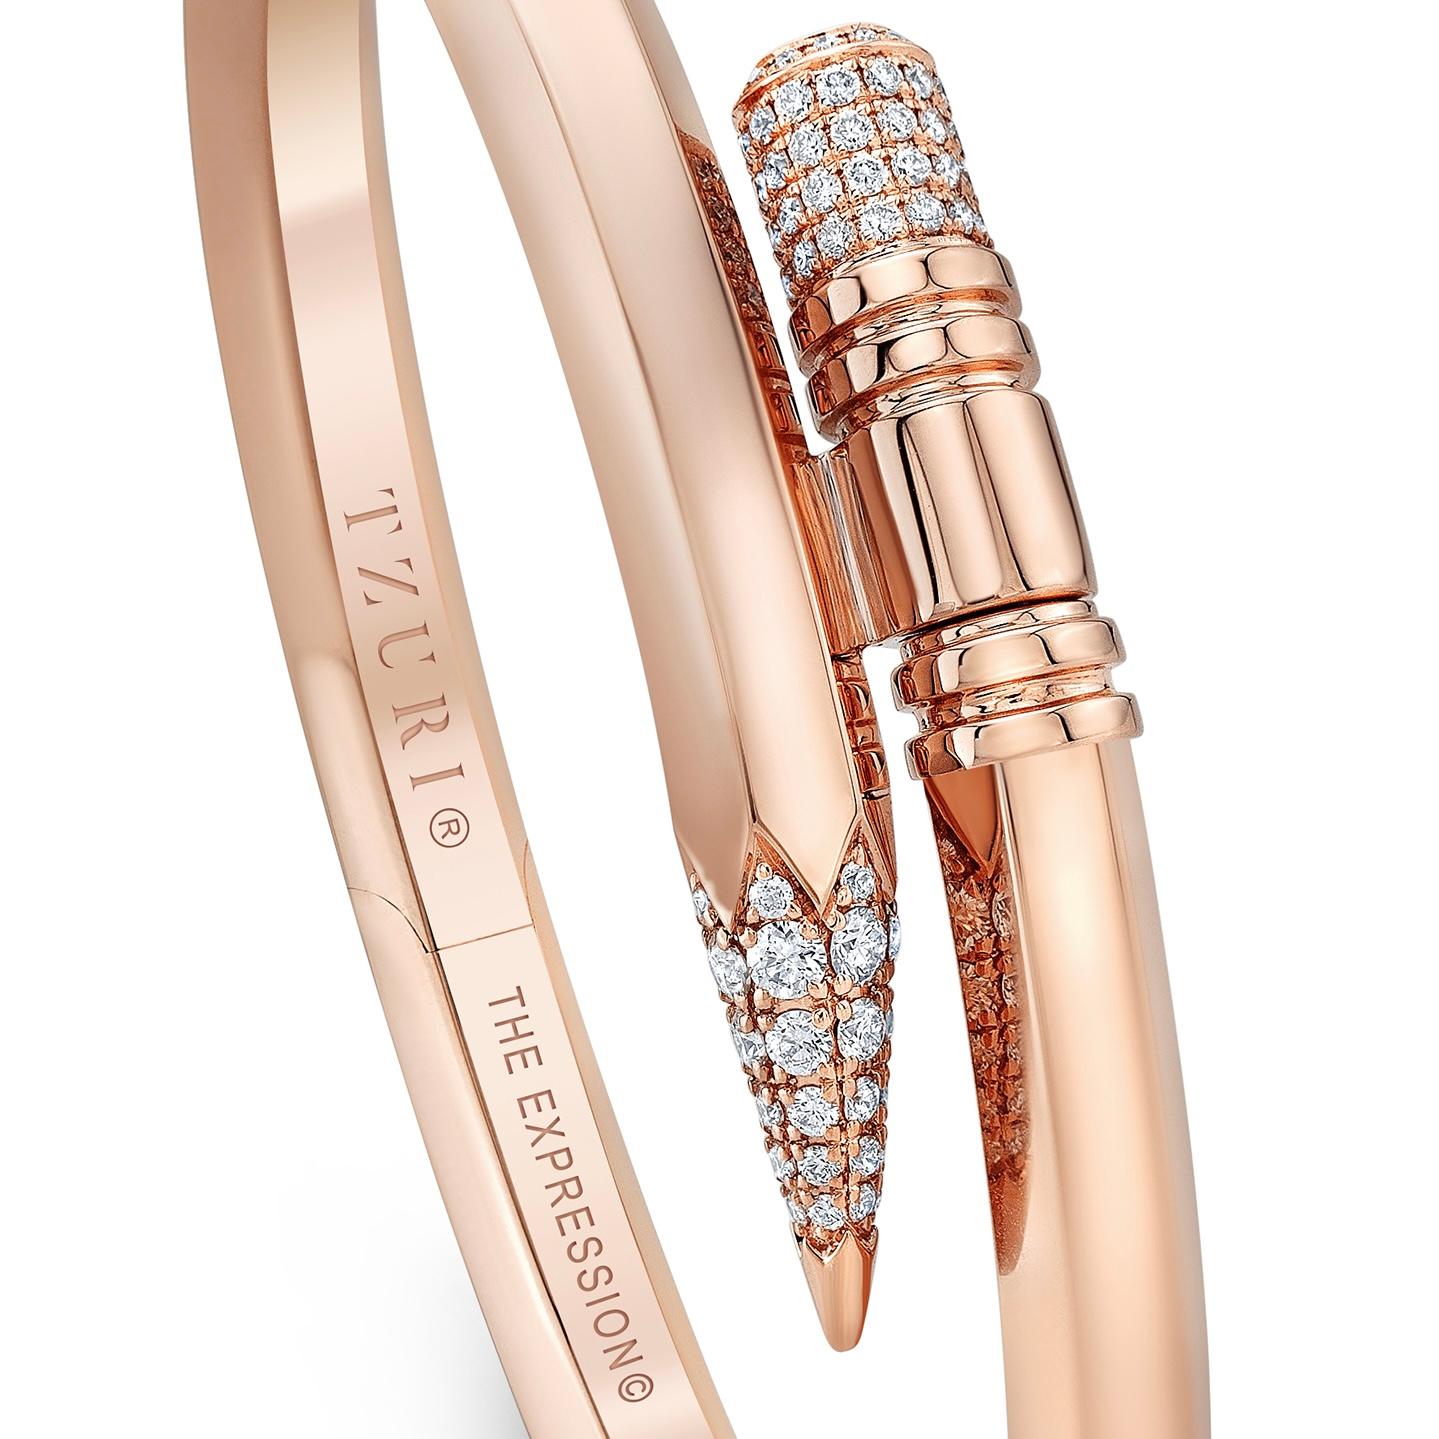 18K Rose Gold Medium Expression Bracelet

5.5 mm Gauge Thickness

Weight: 0.88 ct (approx.)

Color: F-G
Clarity: VS+

Bracelets are produced in limited editions of 500 units, per design, annually. They are engraved with the serial number and